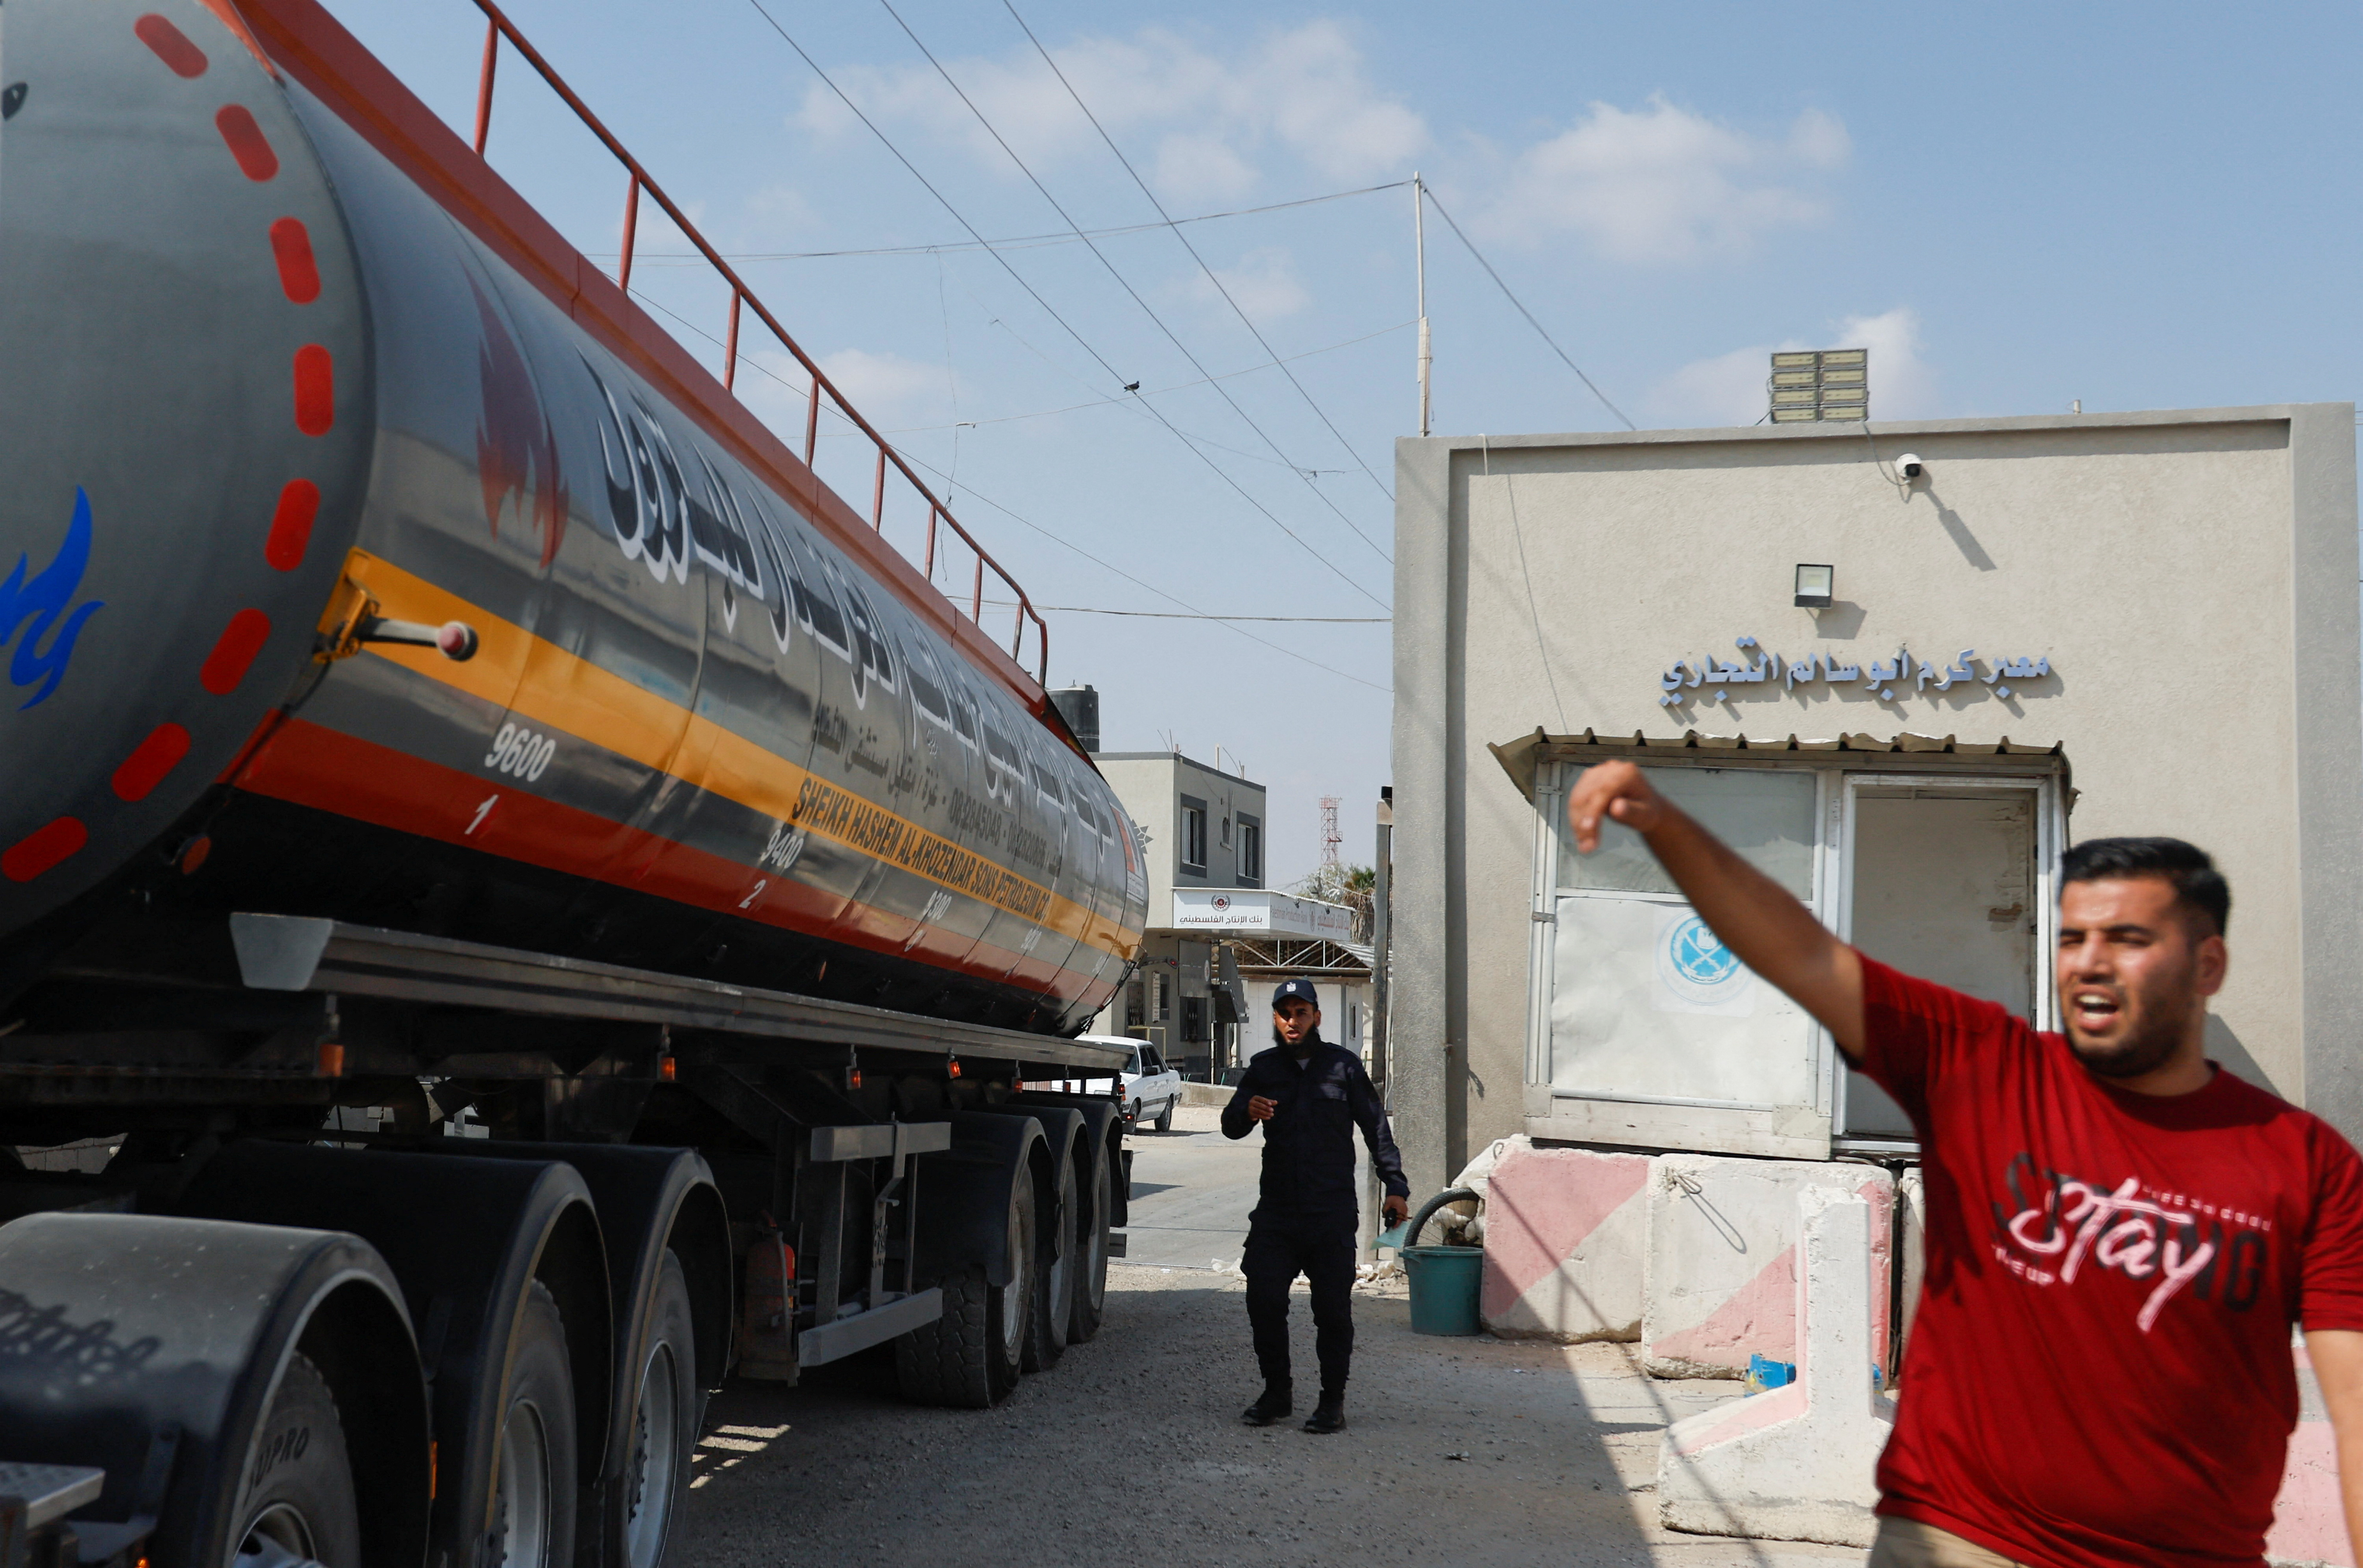 A truck carrying fuel imports for the lone power plant rolls into Gaza, after Israel eased up closures, as ceasefire holds in Rafah